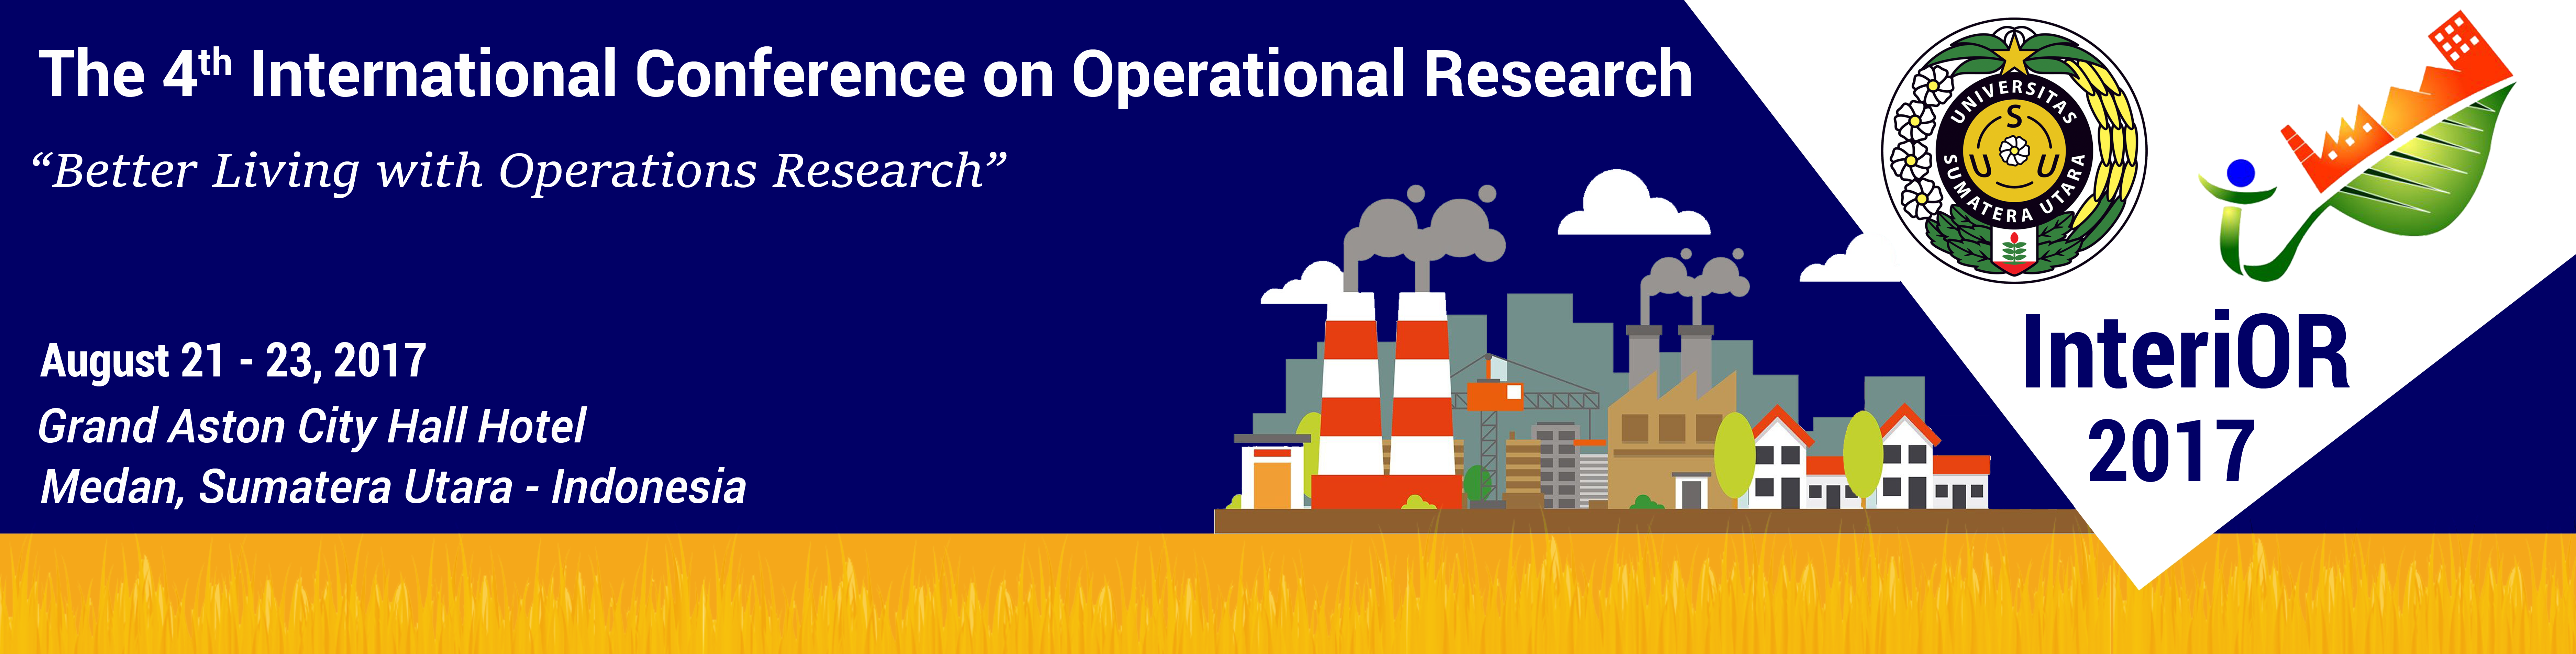 operational research conference